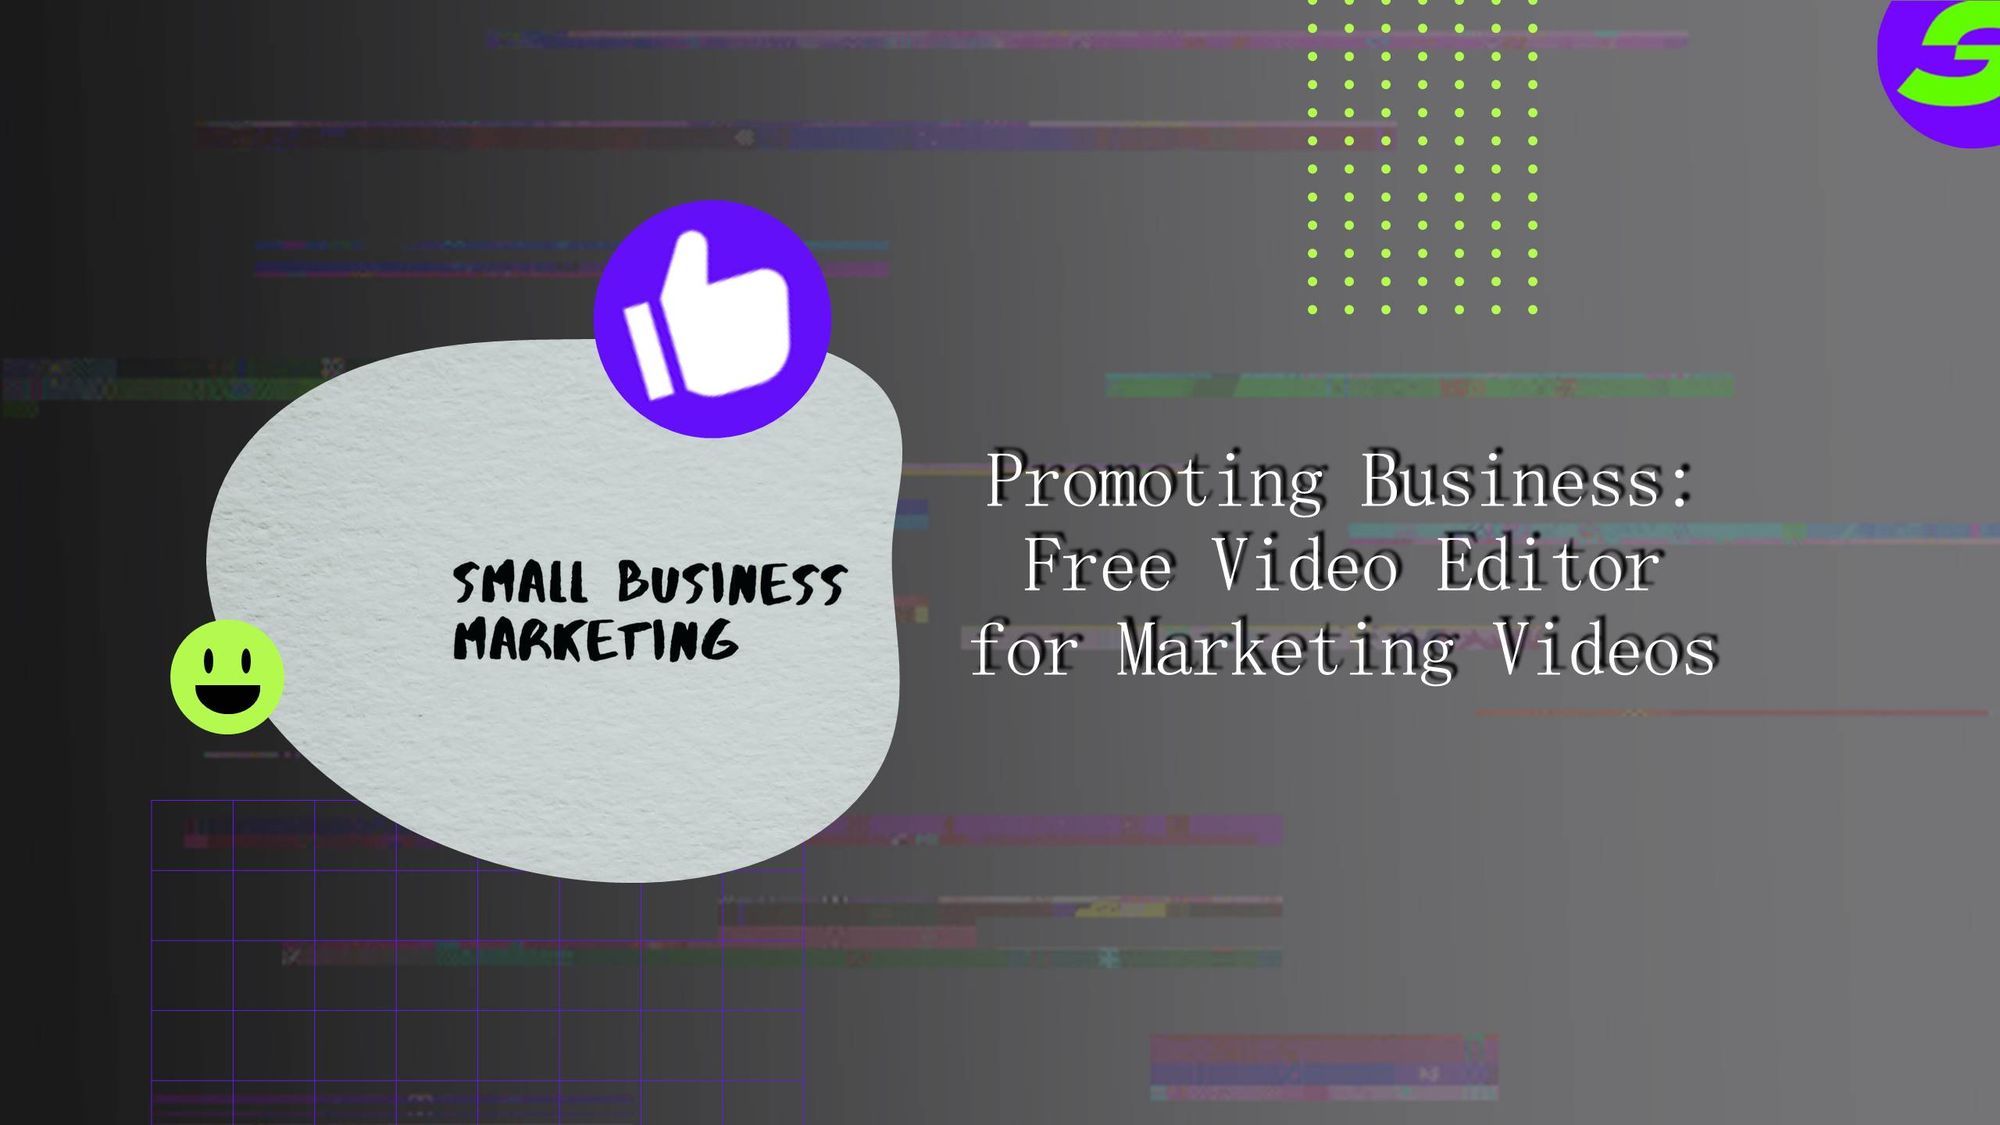 Promote Business with Free Video Editor using Marketing Videos